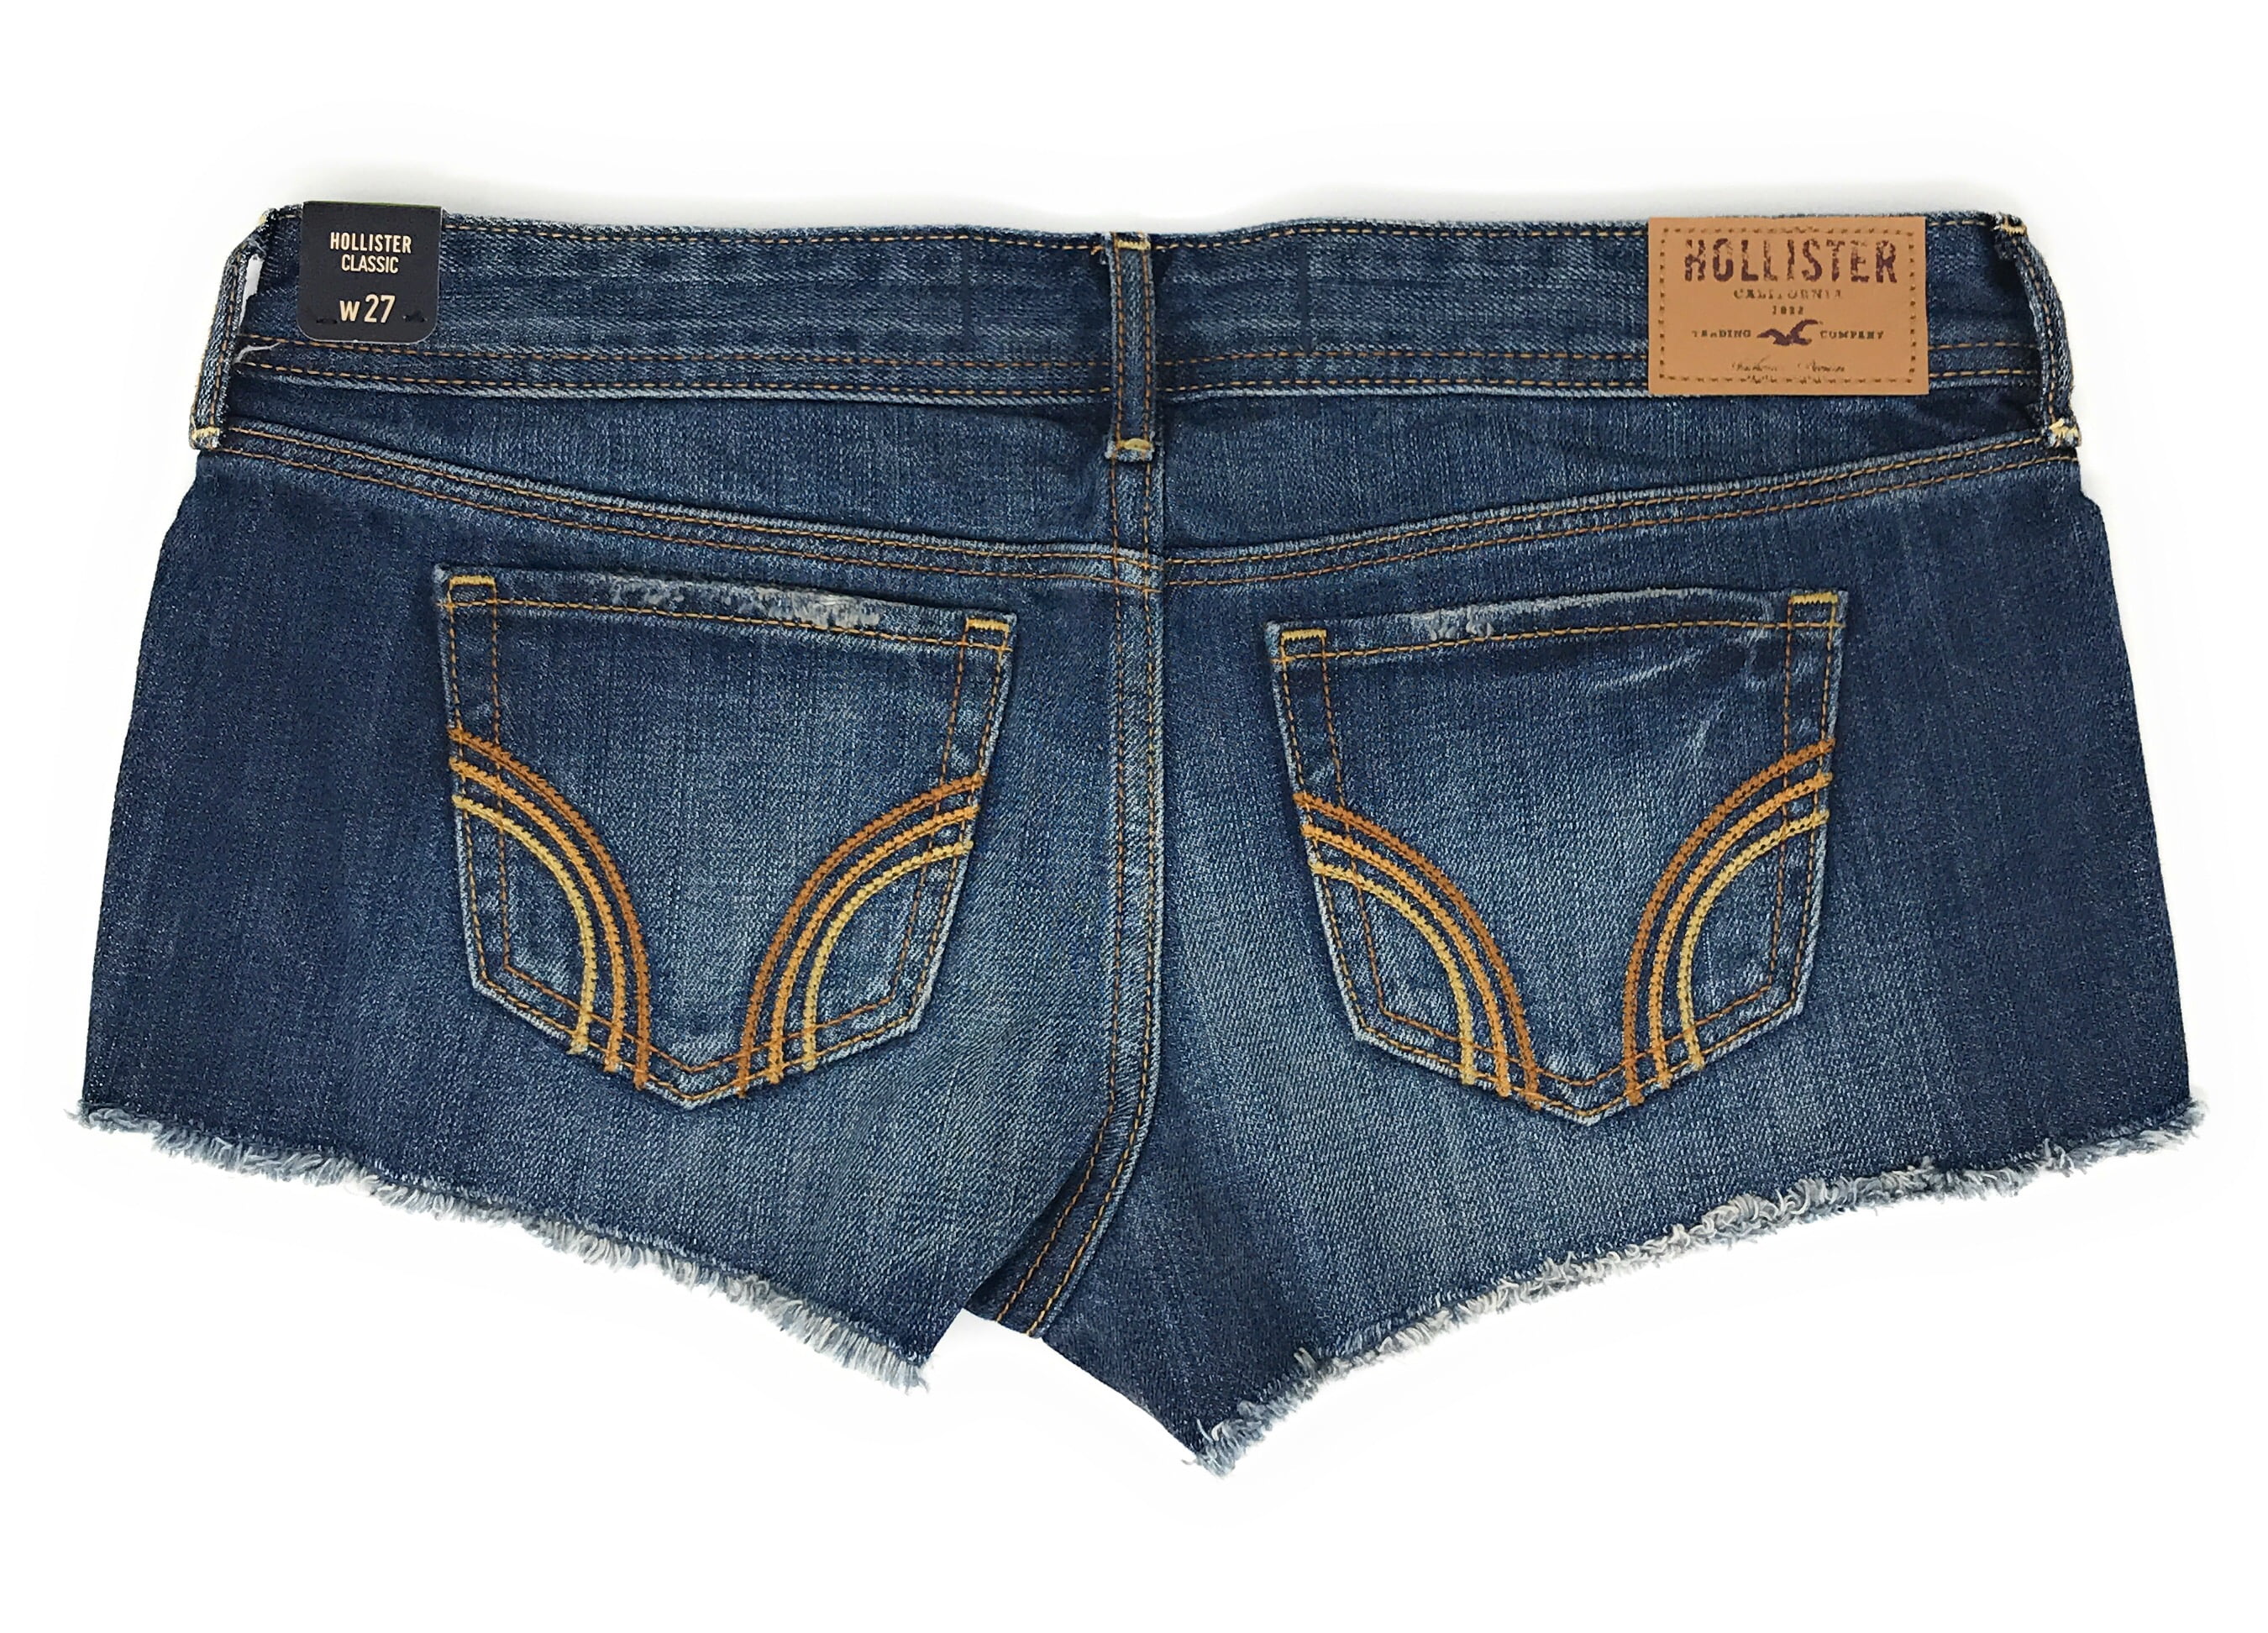 hollister shorts review